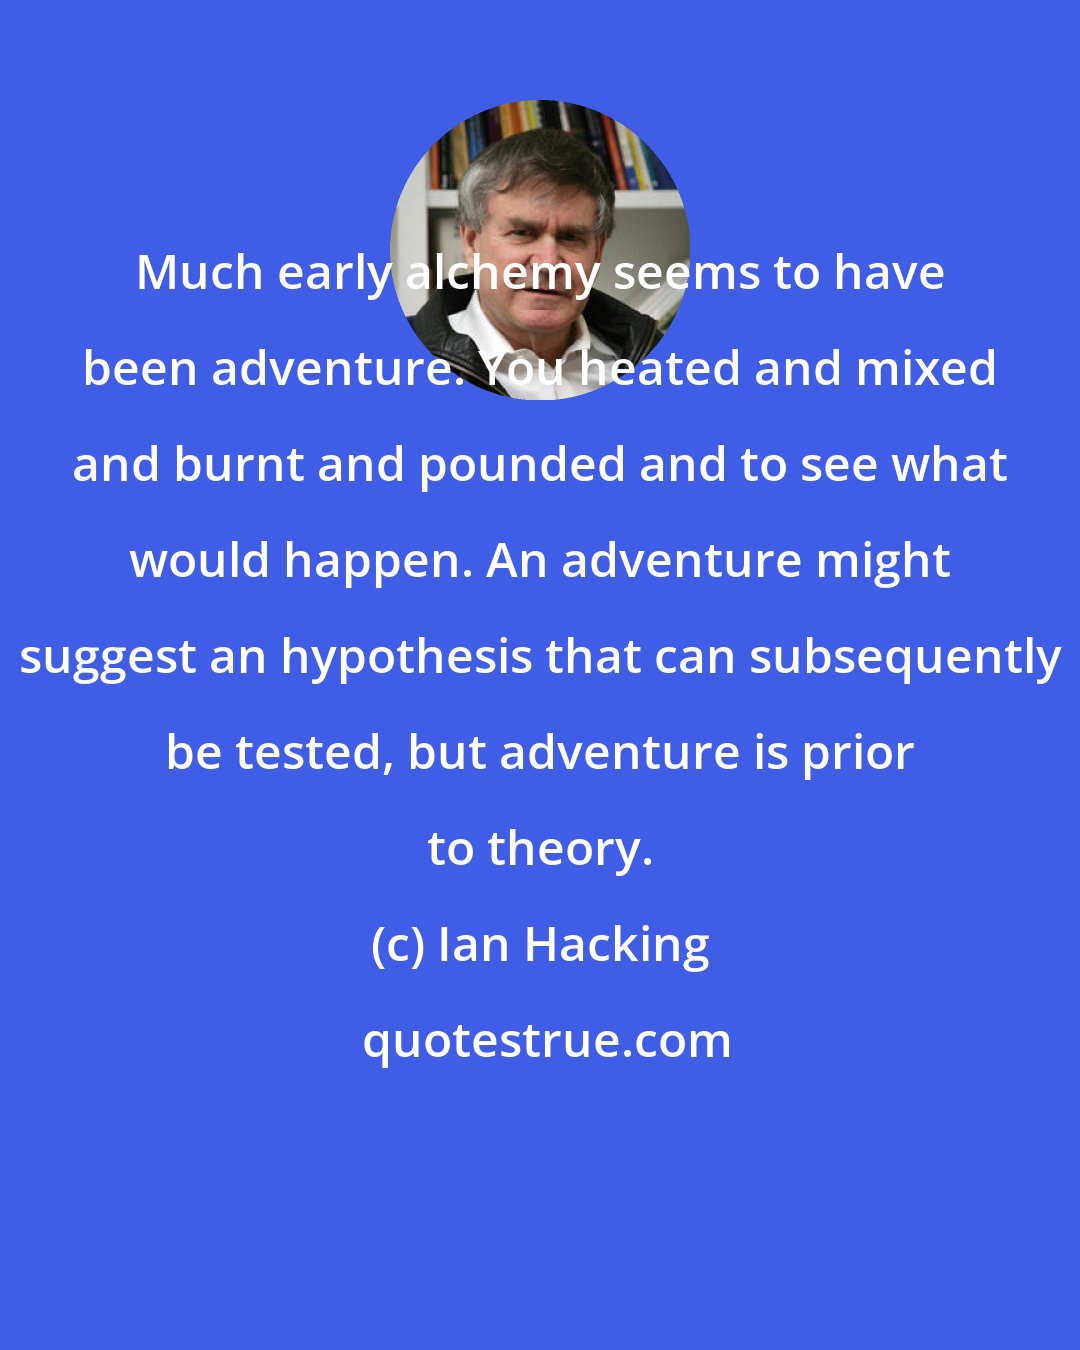 Ian Hacking: Much early alchemy seems to have been adventure. You heated and mixed and burnt and pounded and to see what would happen. An adventure might suggest an hypothesis that can subsequently be tested, but adventure is prior to theory.